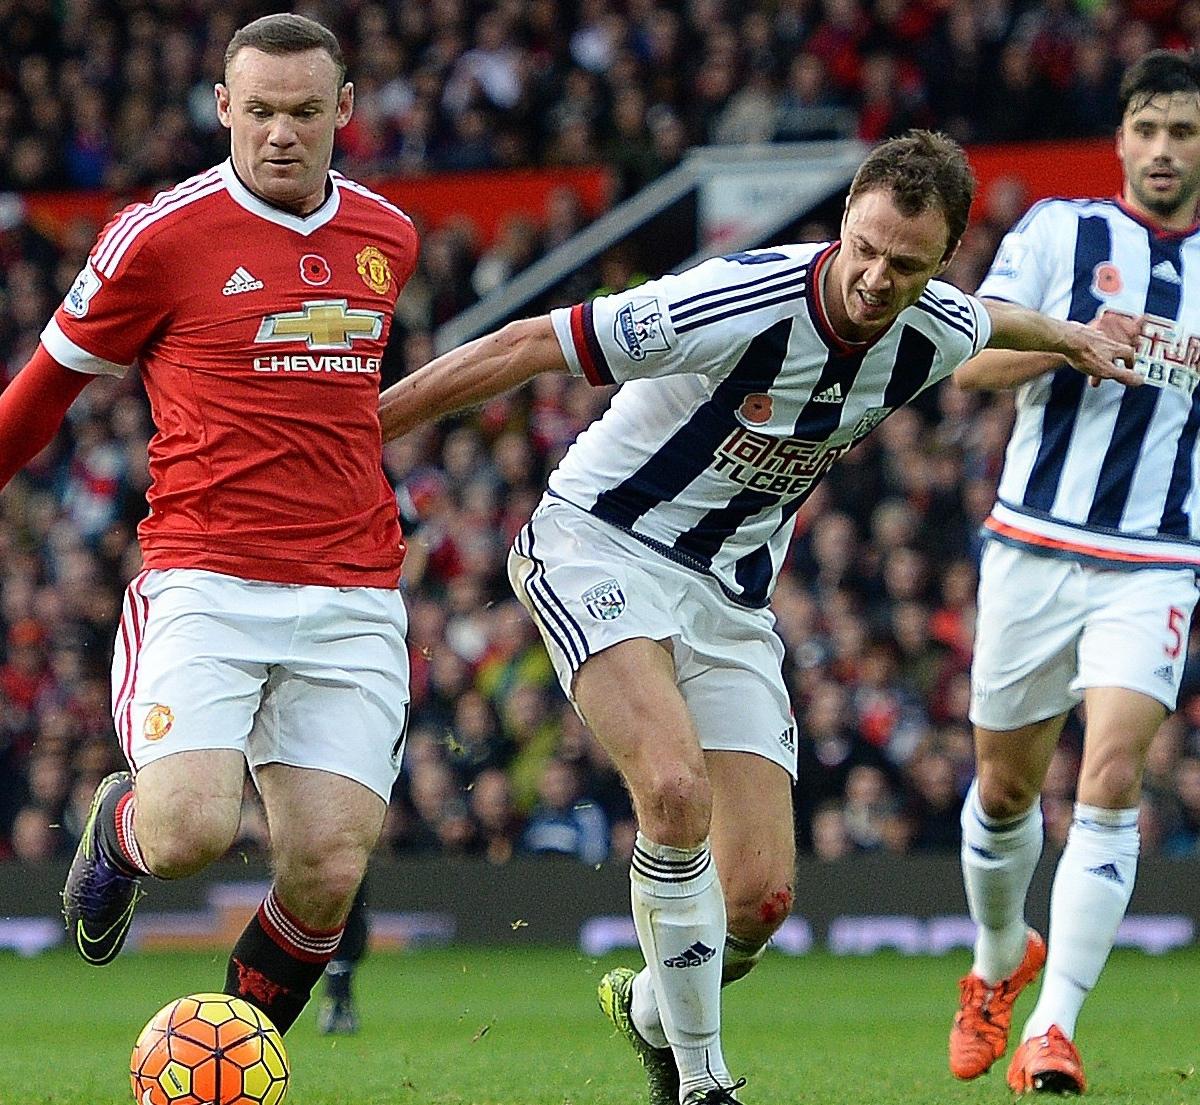 Manchester United vs. West Brom: Live Score, Highlights from Premier